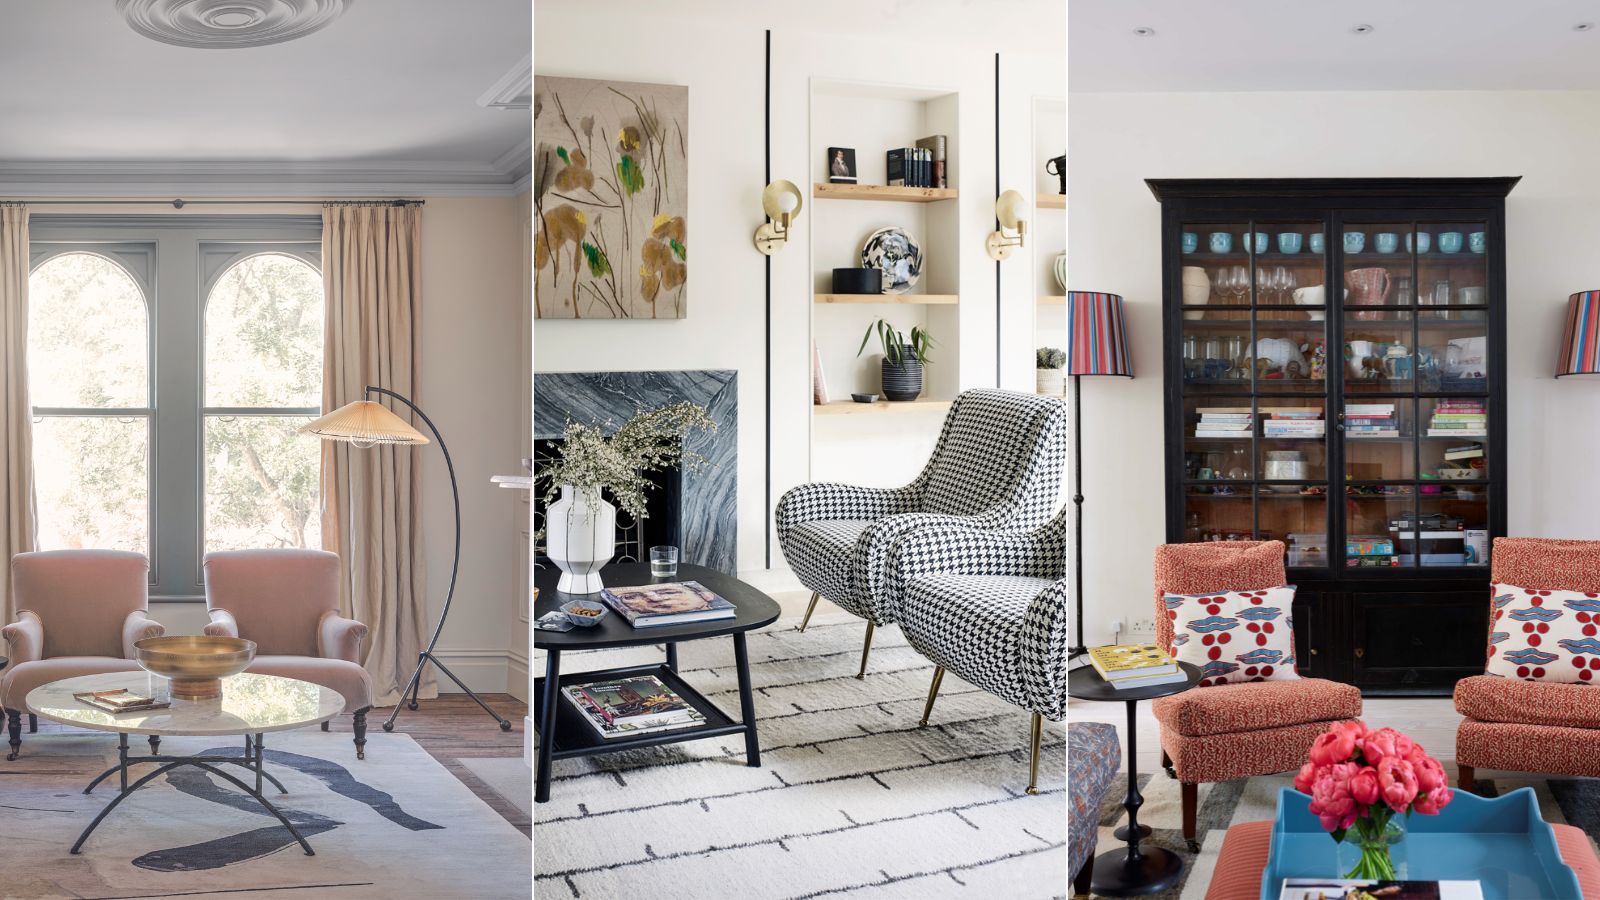 6 easy ways you can use furniture to make a living room look bigger